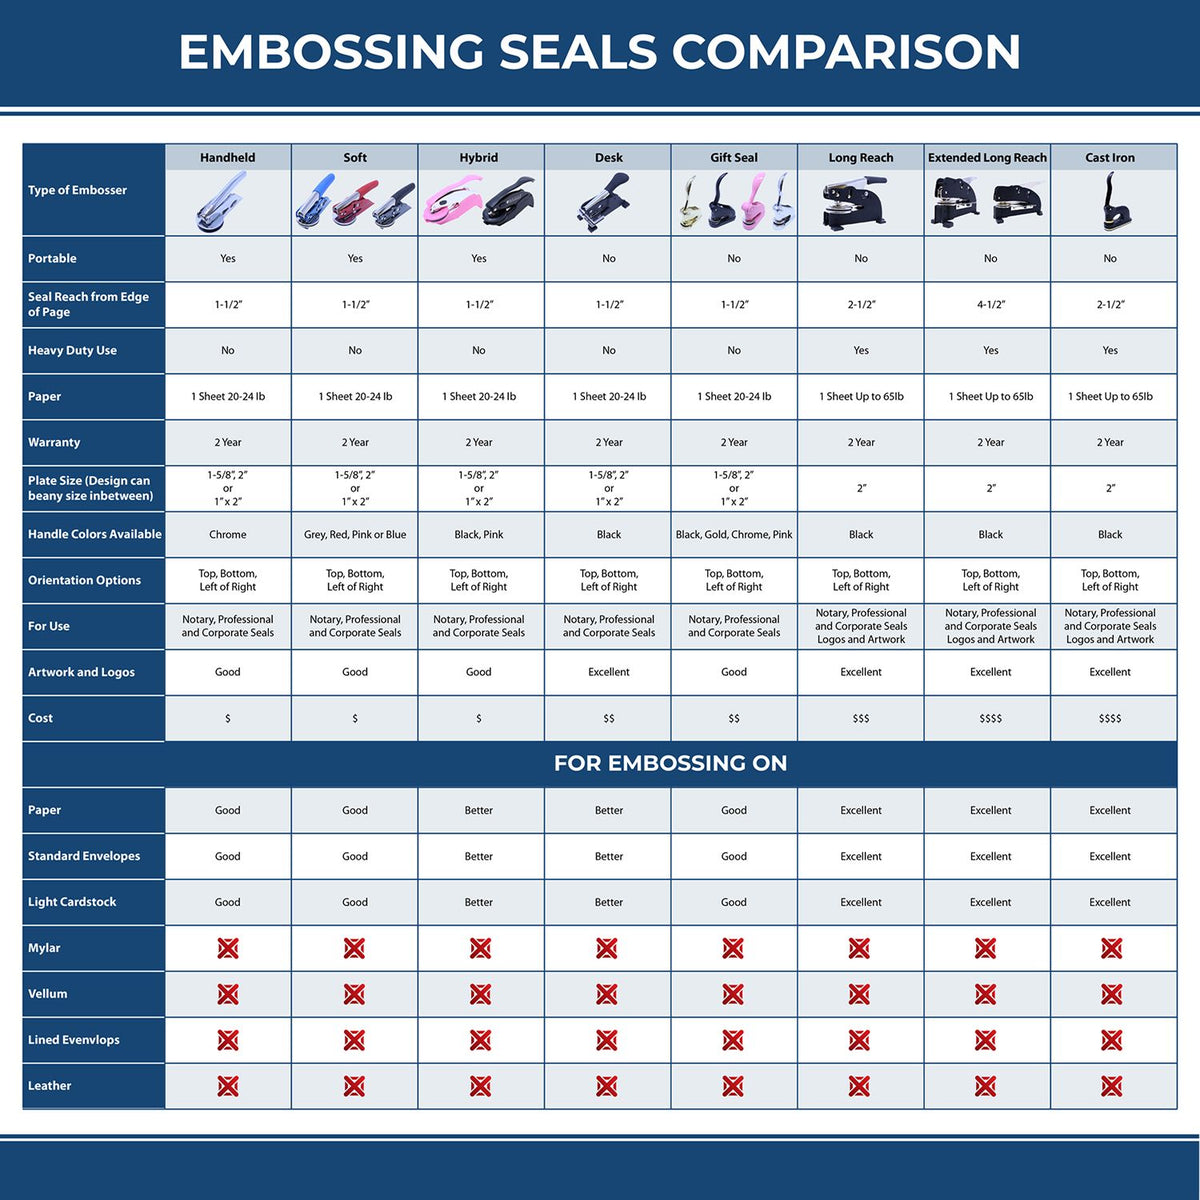 A comparison chart for the different types of mount models available for the Hybrid Maine Land Surveyor Seal